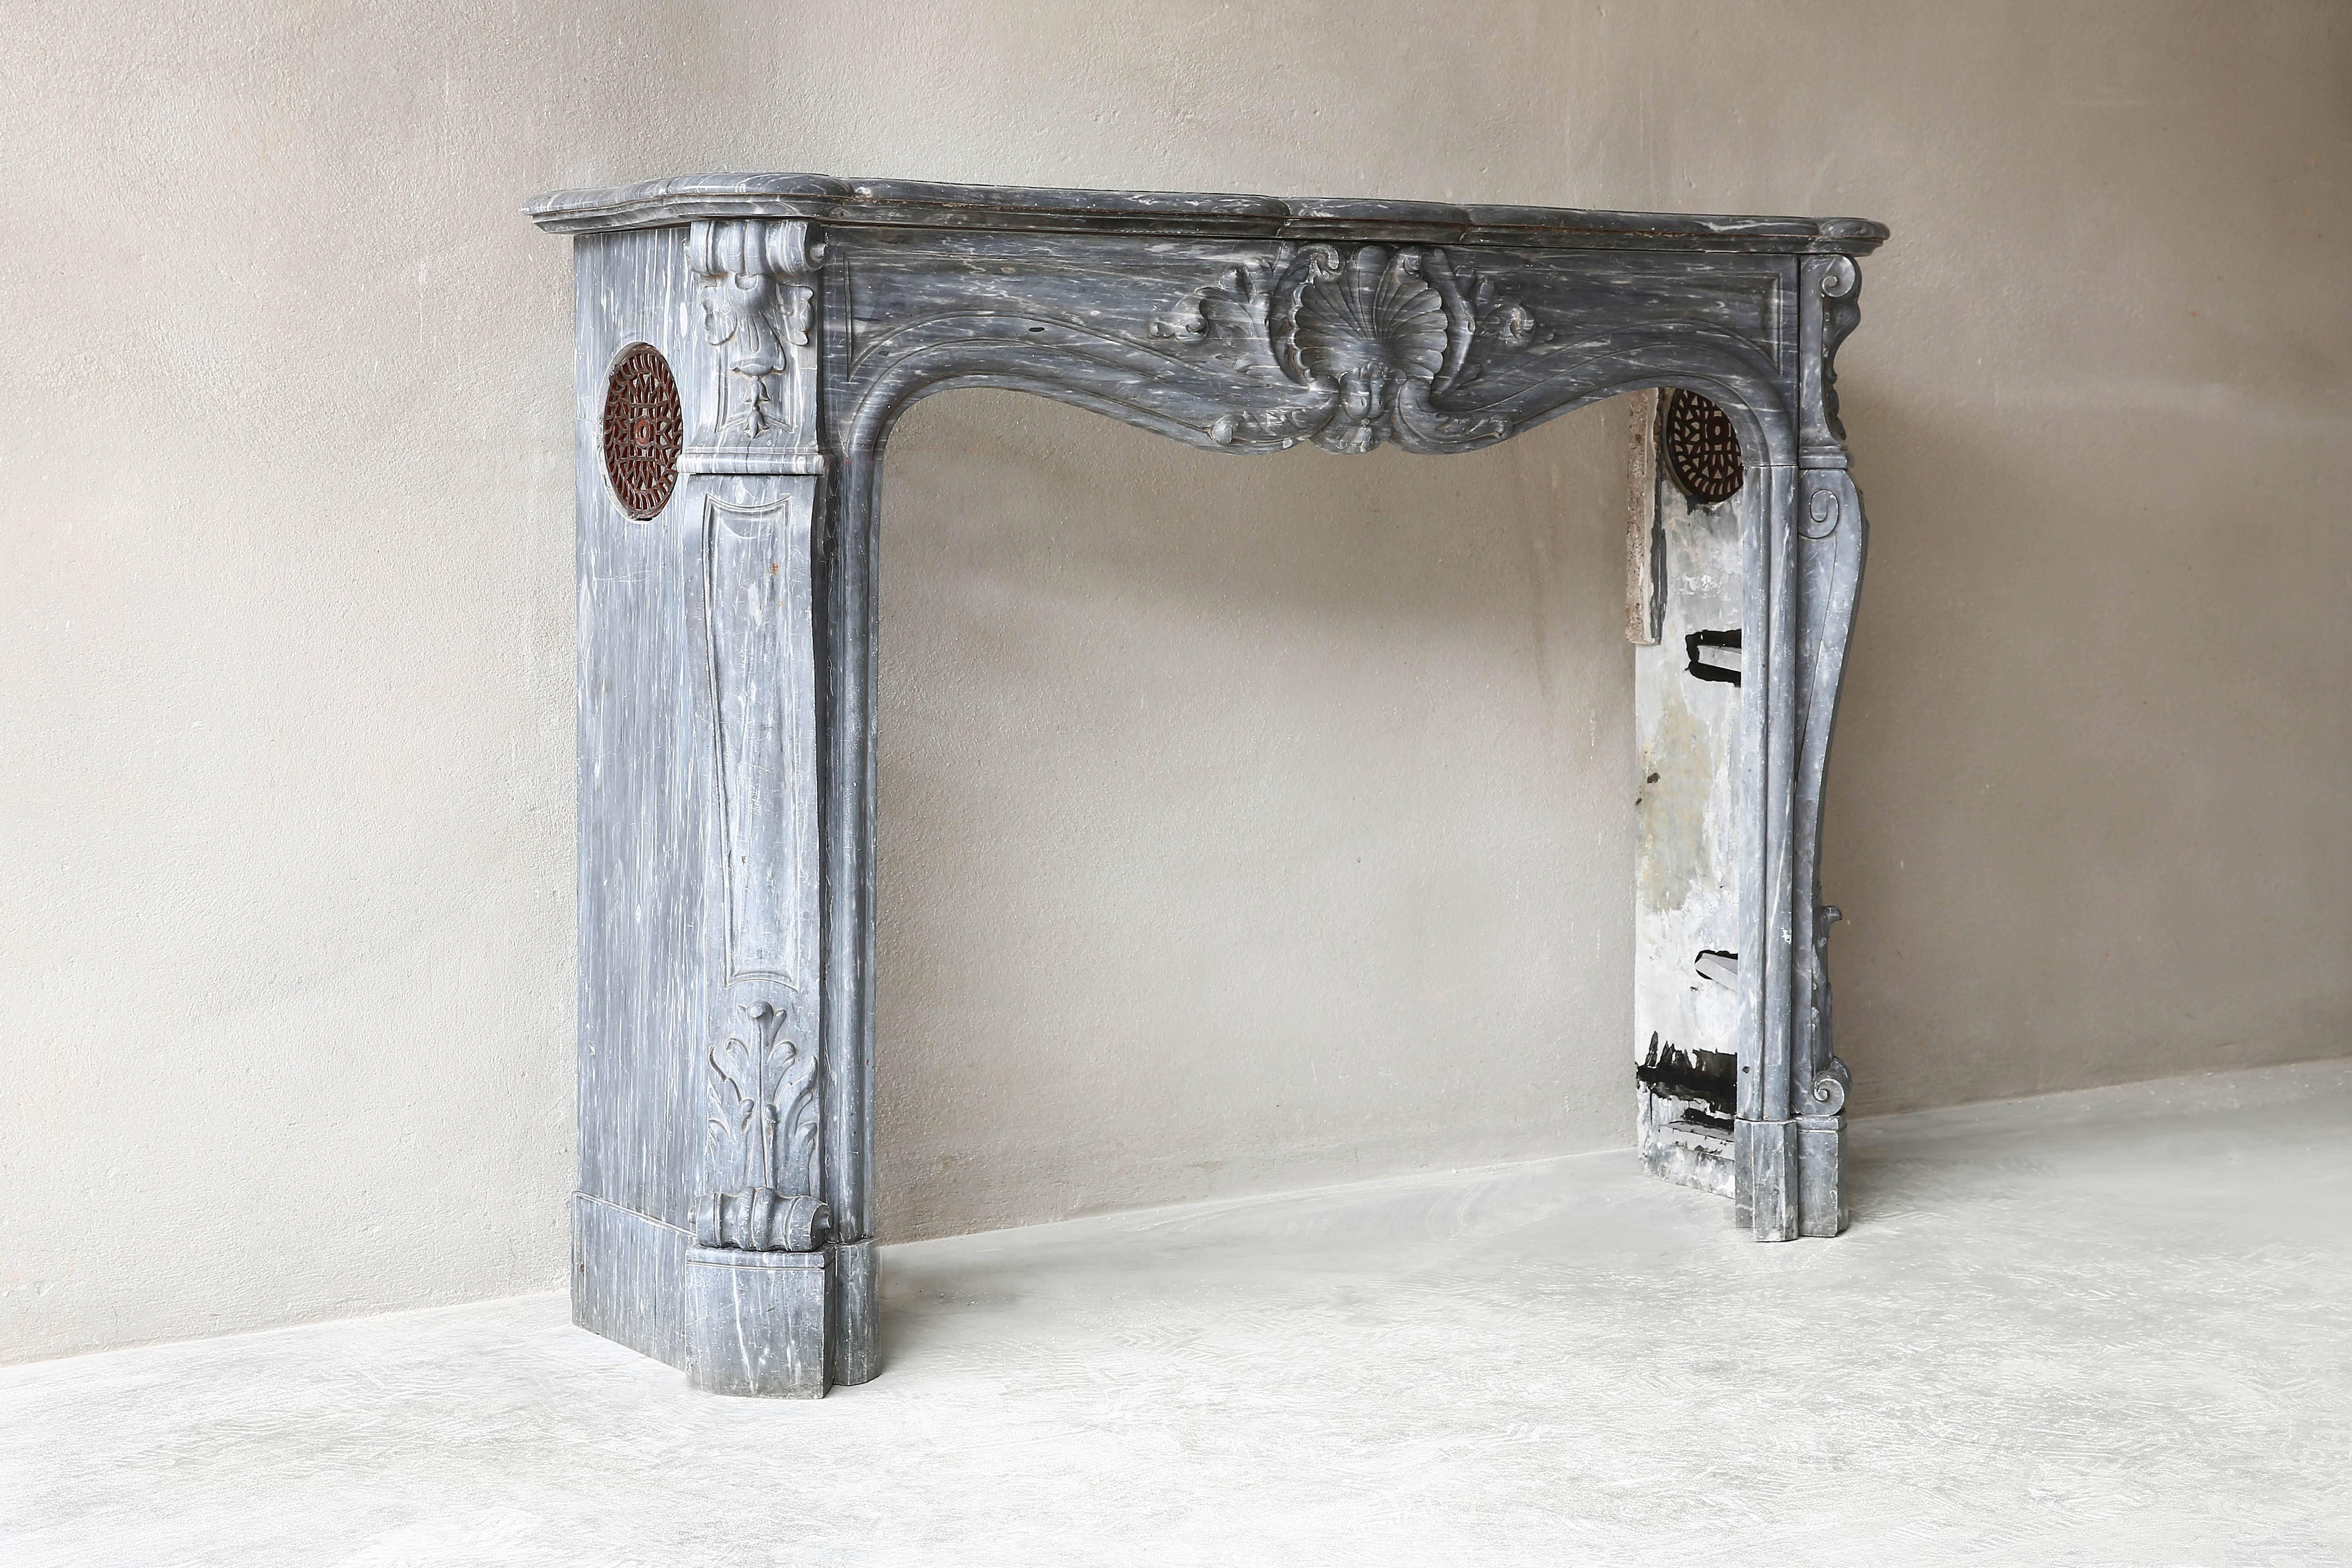 This very unique antique marble fireplace is made from the Italian marble type blue turquin. This Italian type of marble is extracted from the quarries of the Apuan Alps, such as Carrara, where it is called Bardiglio Carrara. It can also be found in